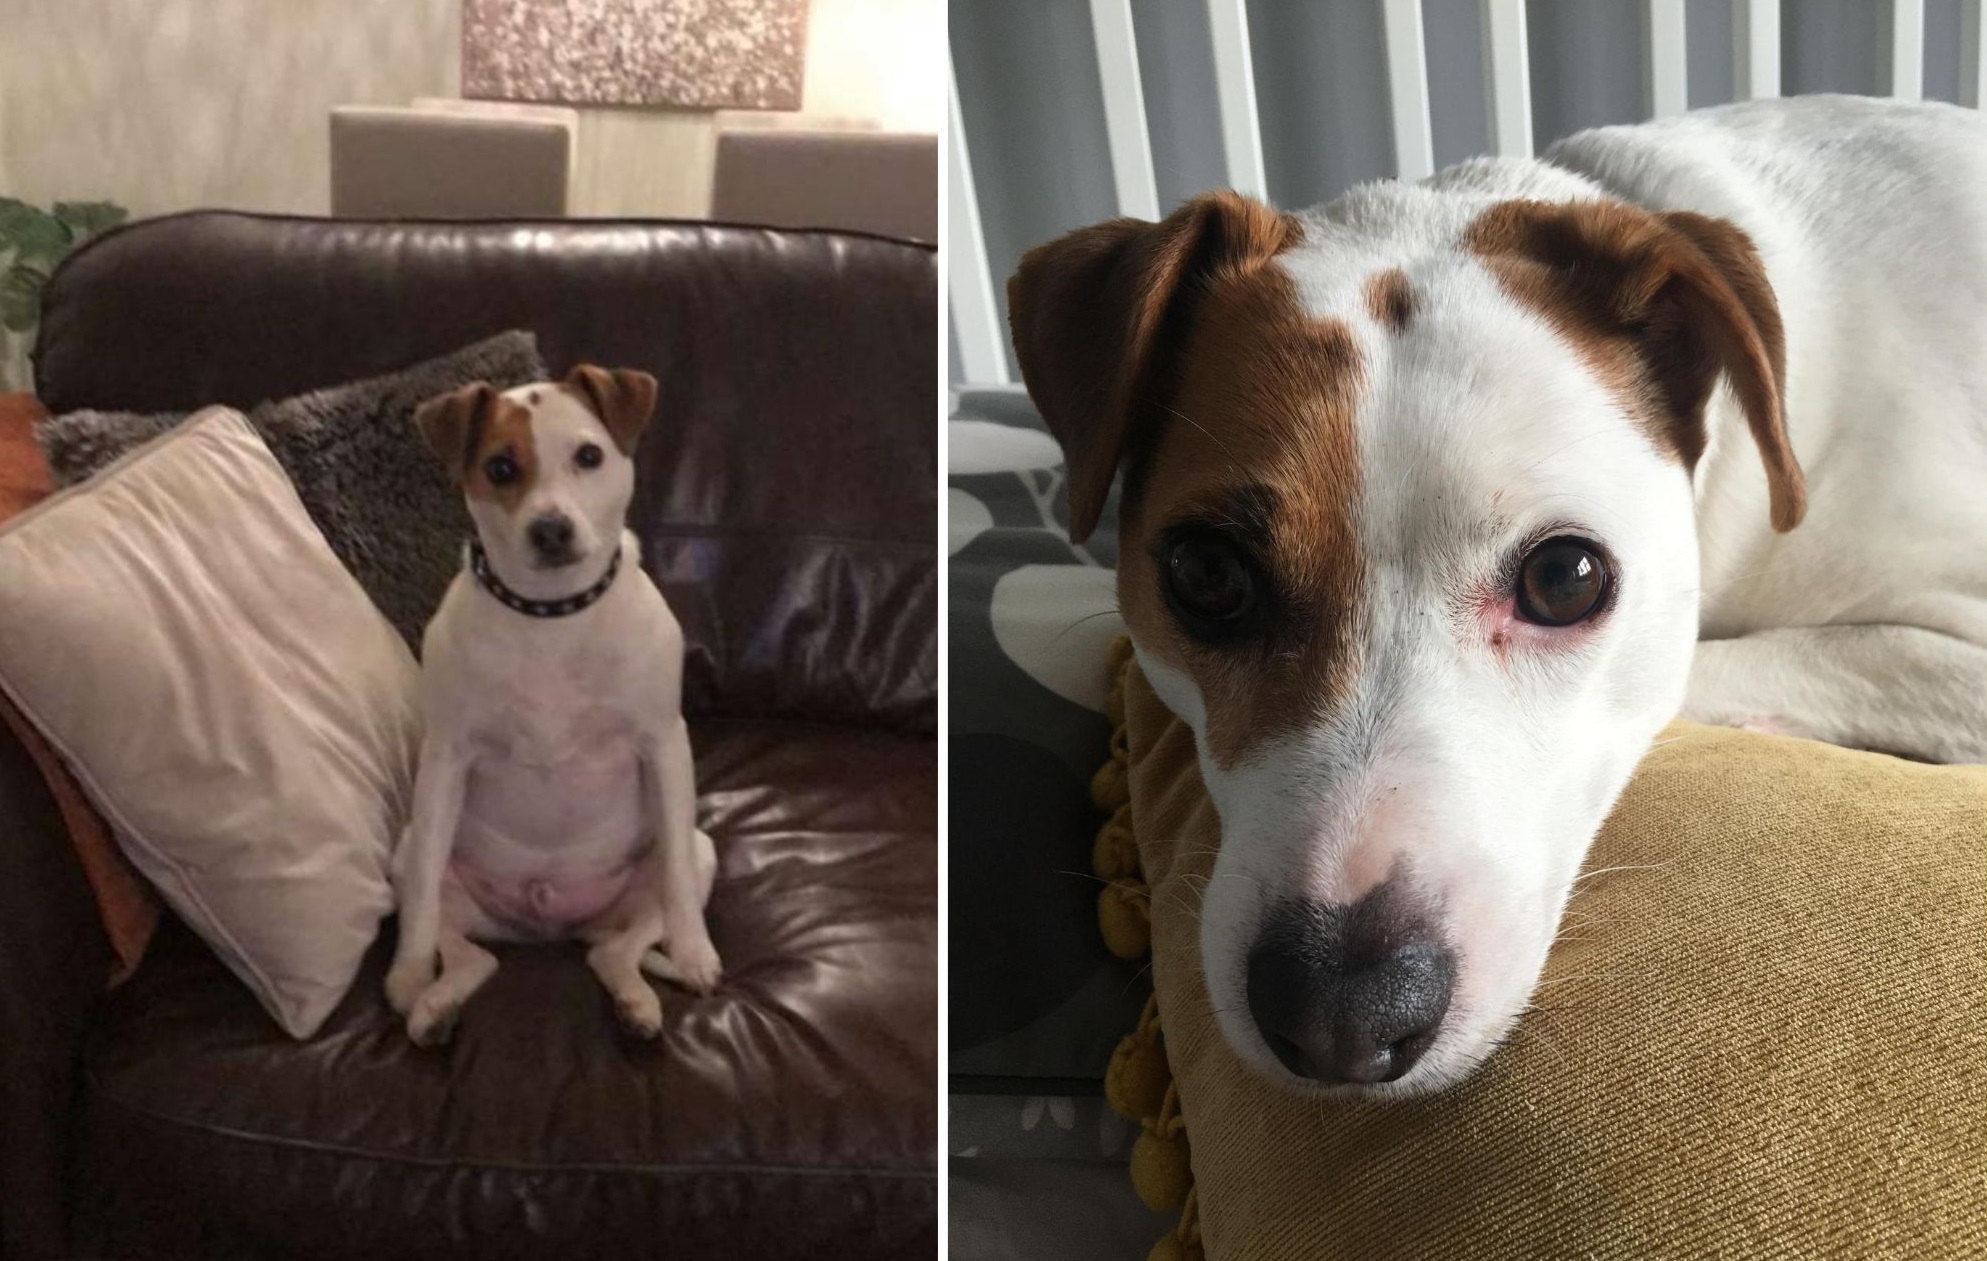 Andrea Jones, from Wrexham, said about her dog: “Buster loves cuddles and comfort but does not like the postman!”